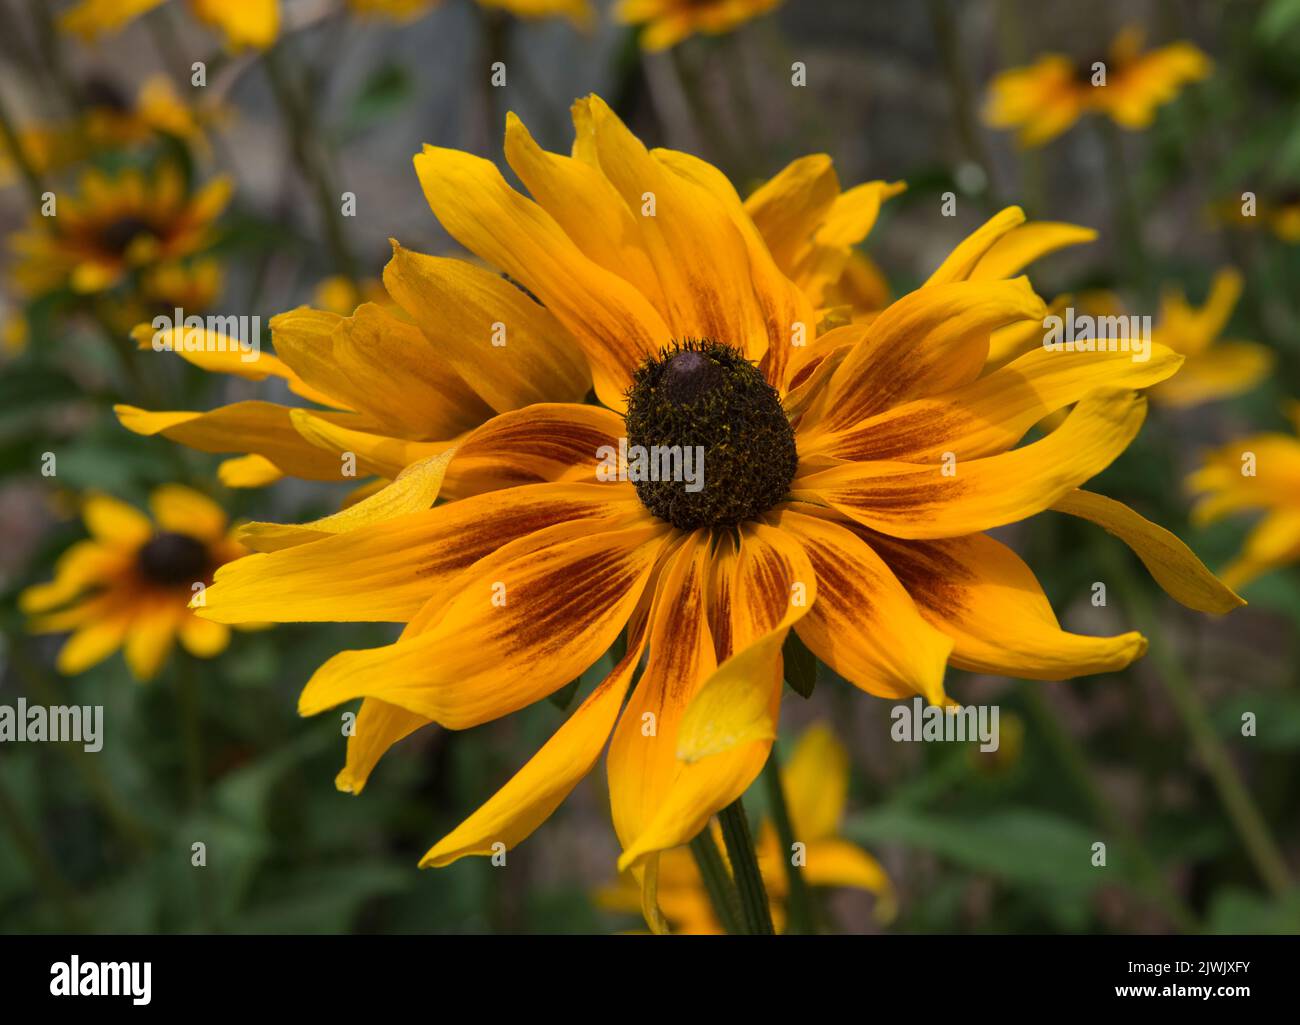 Large udbeckia flower in full bloom in an English garden Stock Photo ...